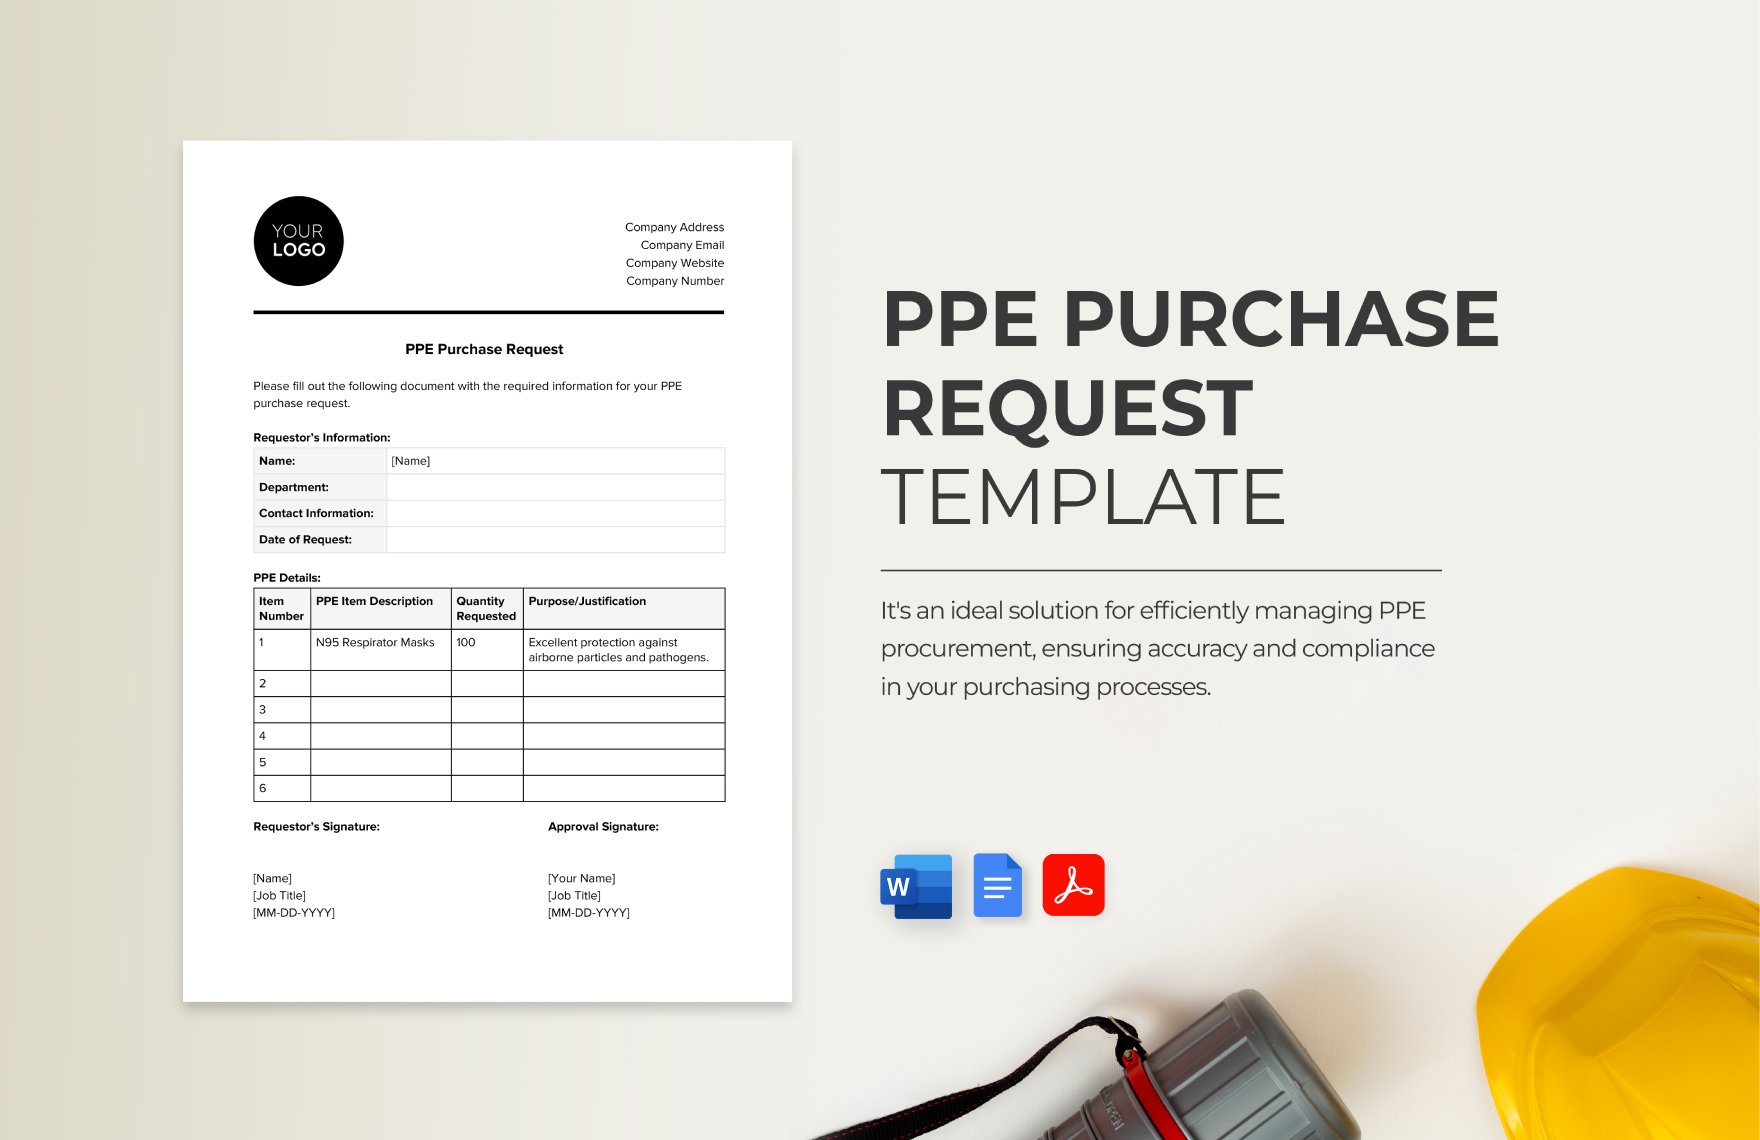 PPE Purchase Request Template